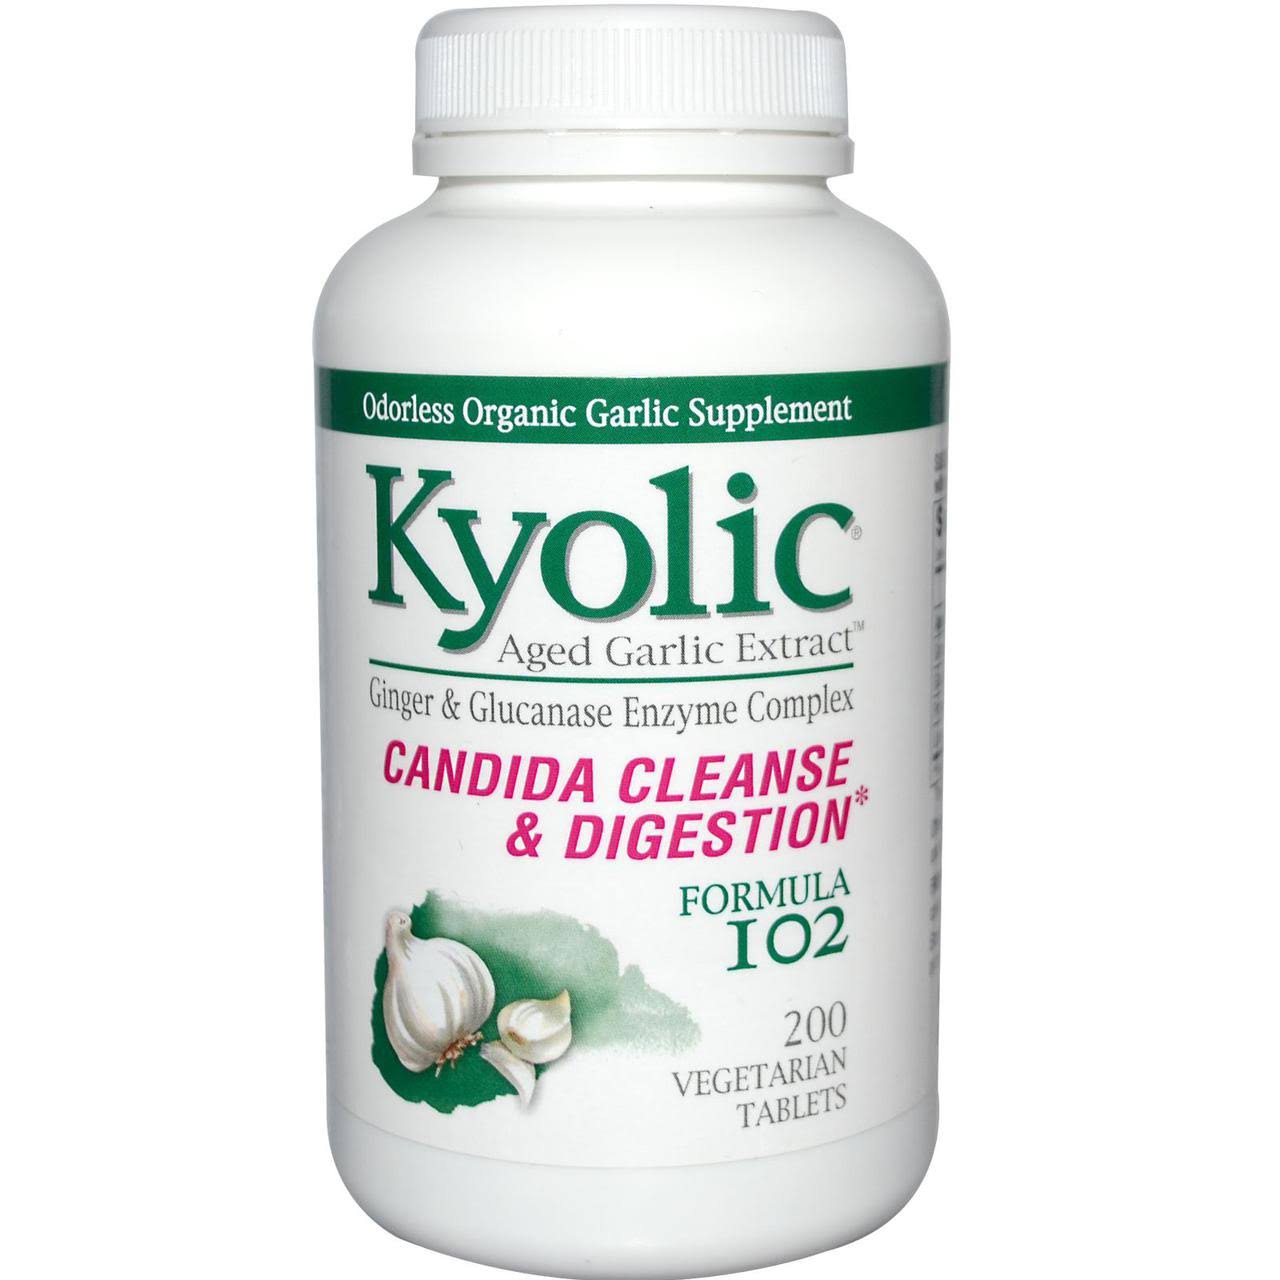 Kyolic Aged Garlic Extract Candida Cleanse and Digestion Formula Supplement - 200 Vegetarian Tablets